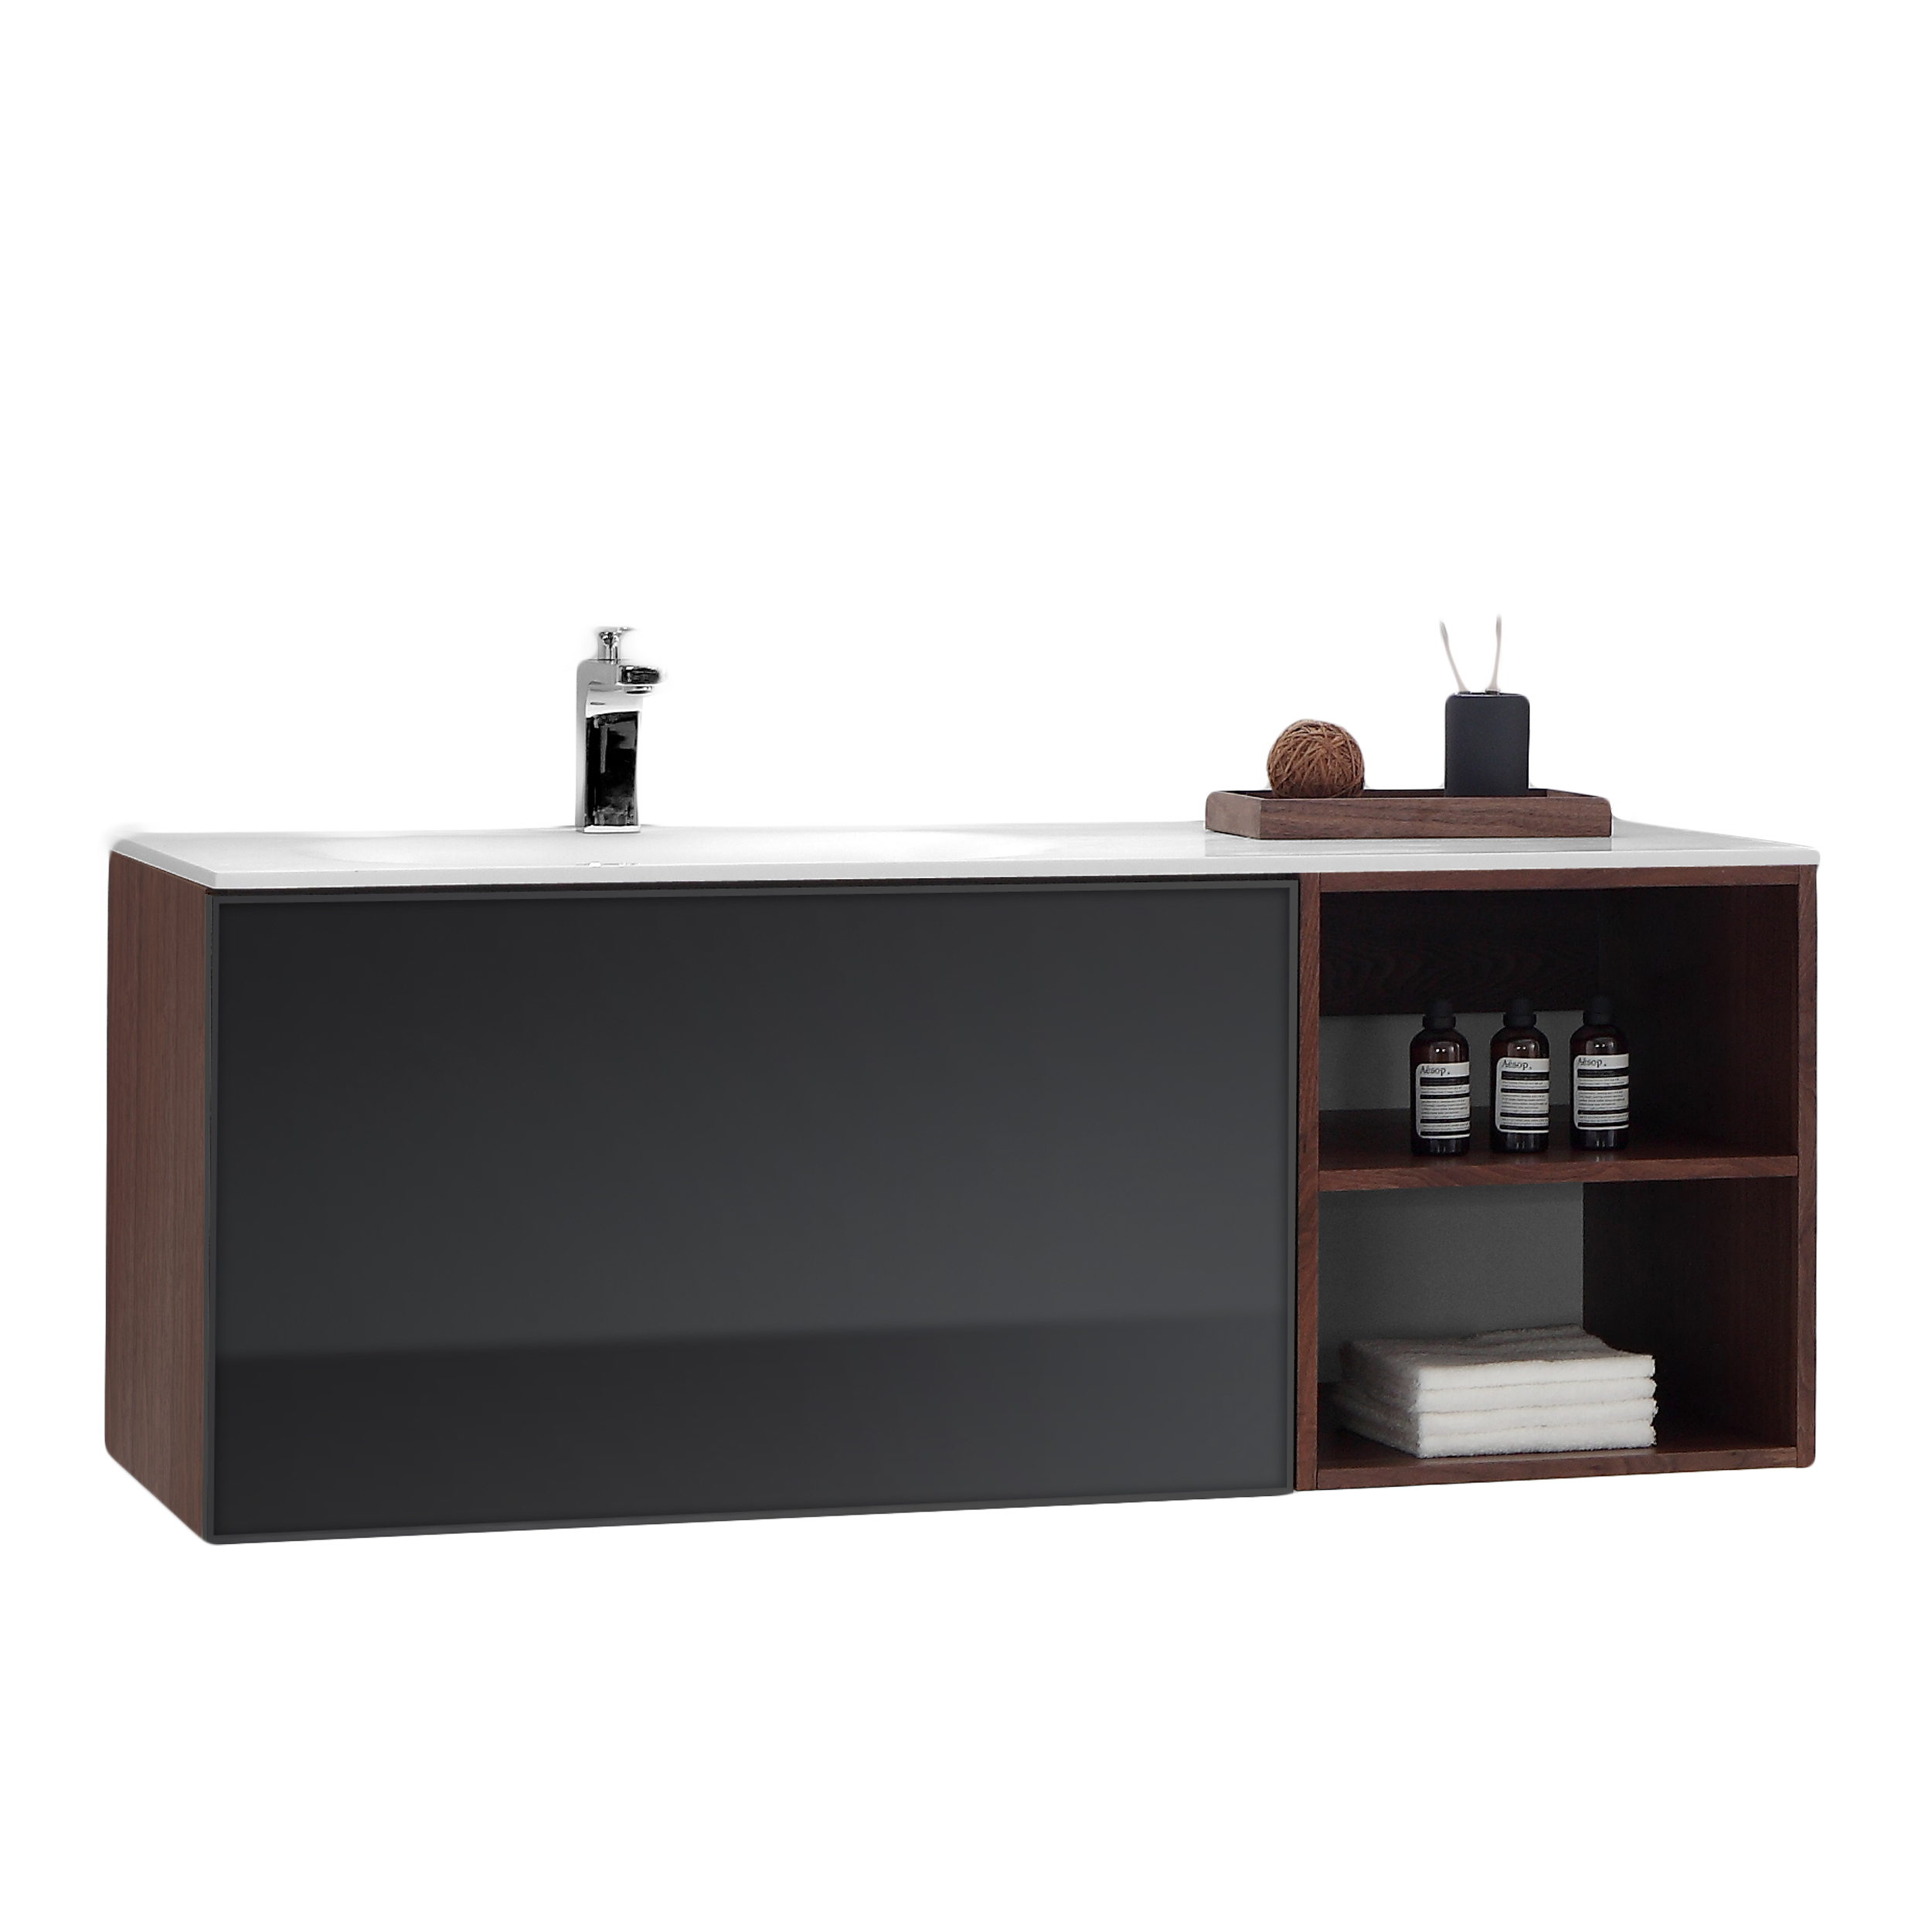 Eviva Napa 48 Grey And Walnut Wall Mount Bathroom Vanity With White Integrated Solid Surface Sink